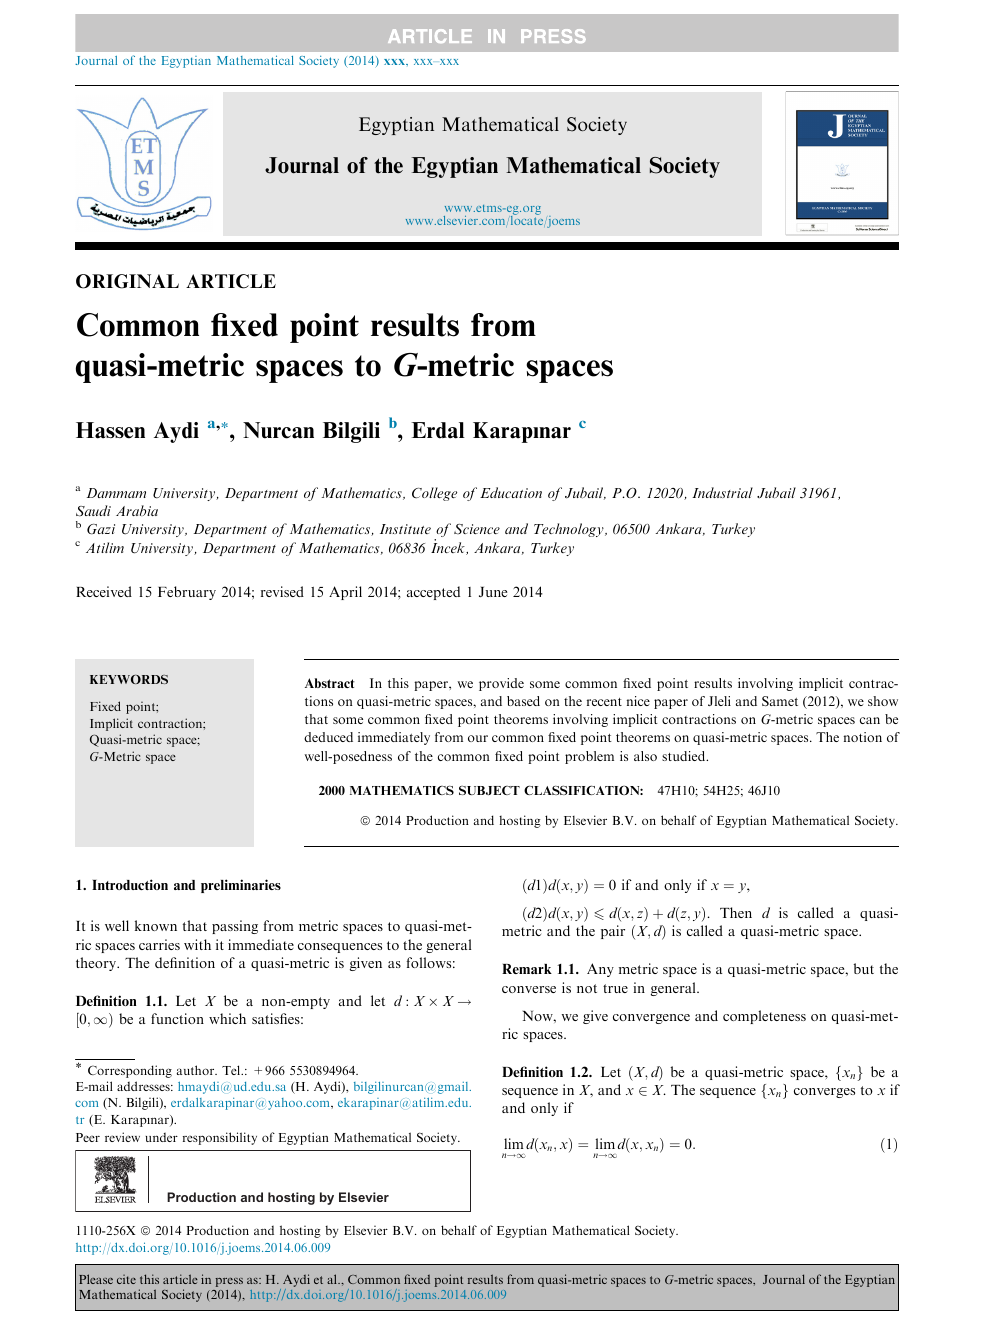 Common Fixed Point Results From Quasi Metric Spaces To G Metric Spaces Topic Of Research Paper In Mathematics Download Scholarly Article Pdf And Read For Free On Cyberleninka Open Science Hub